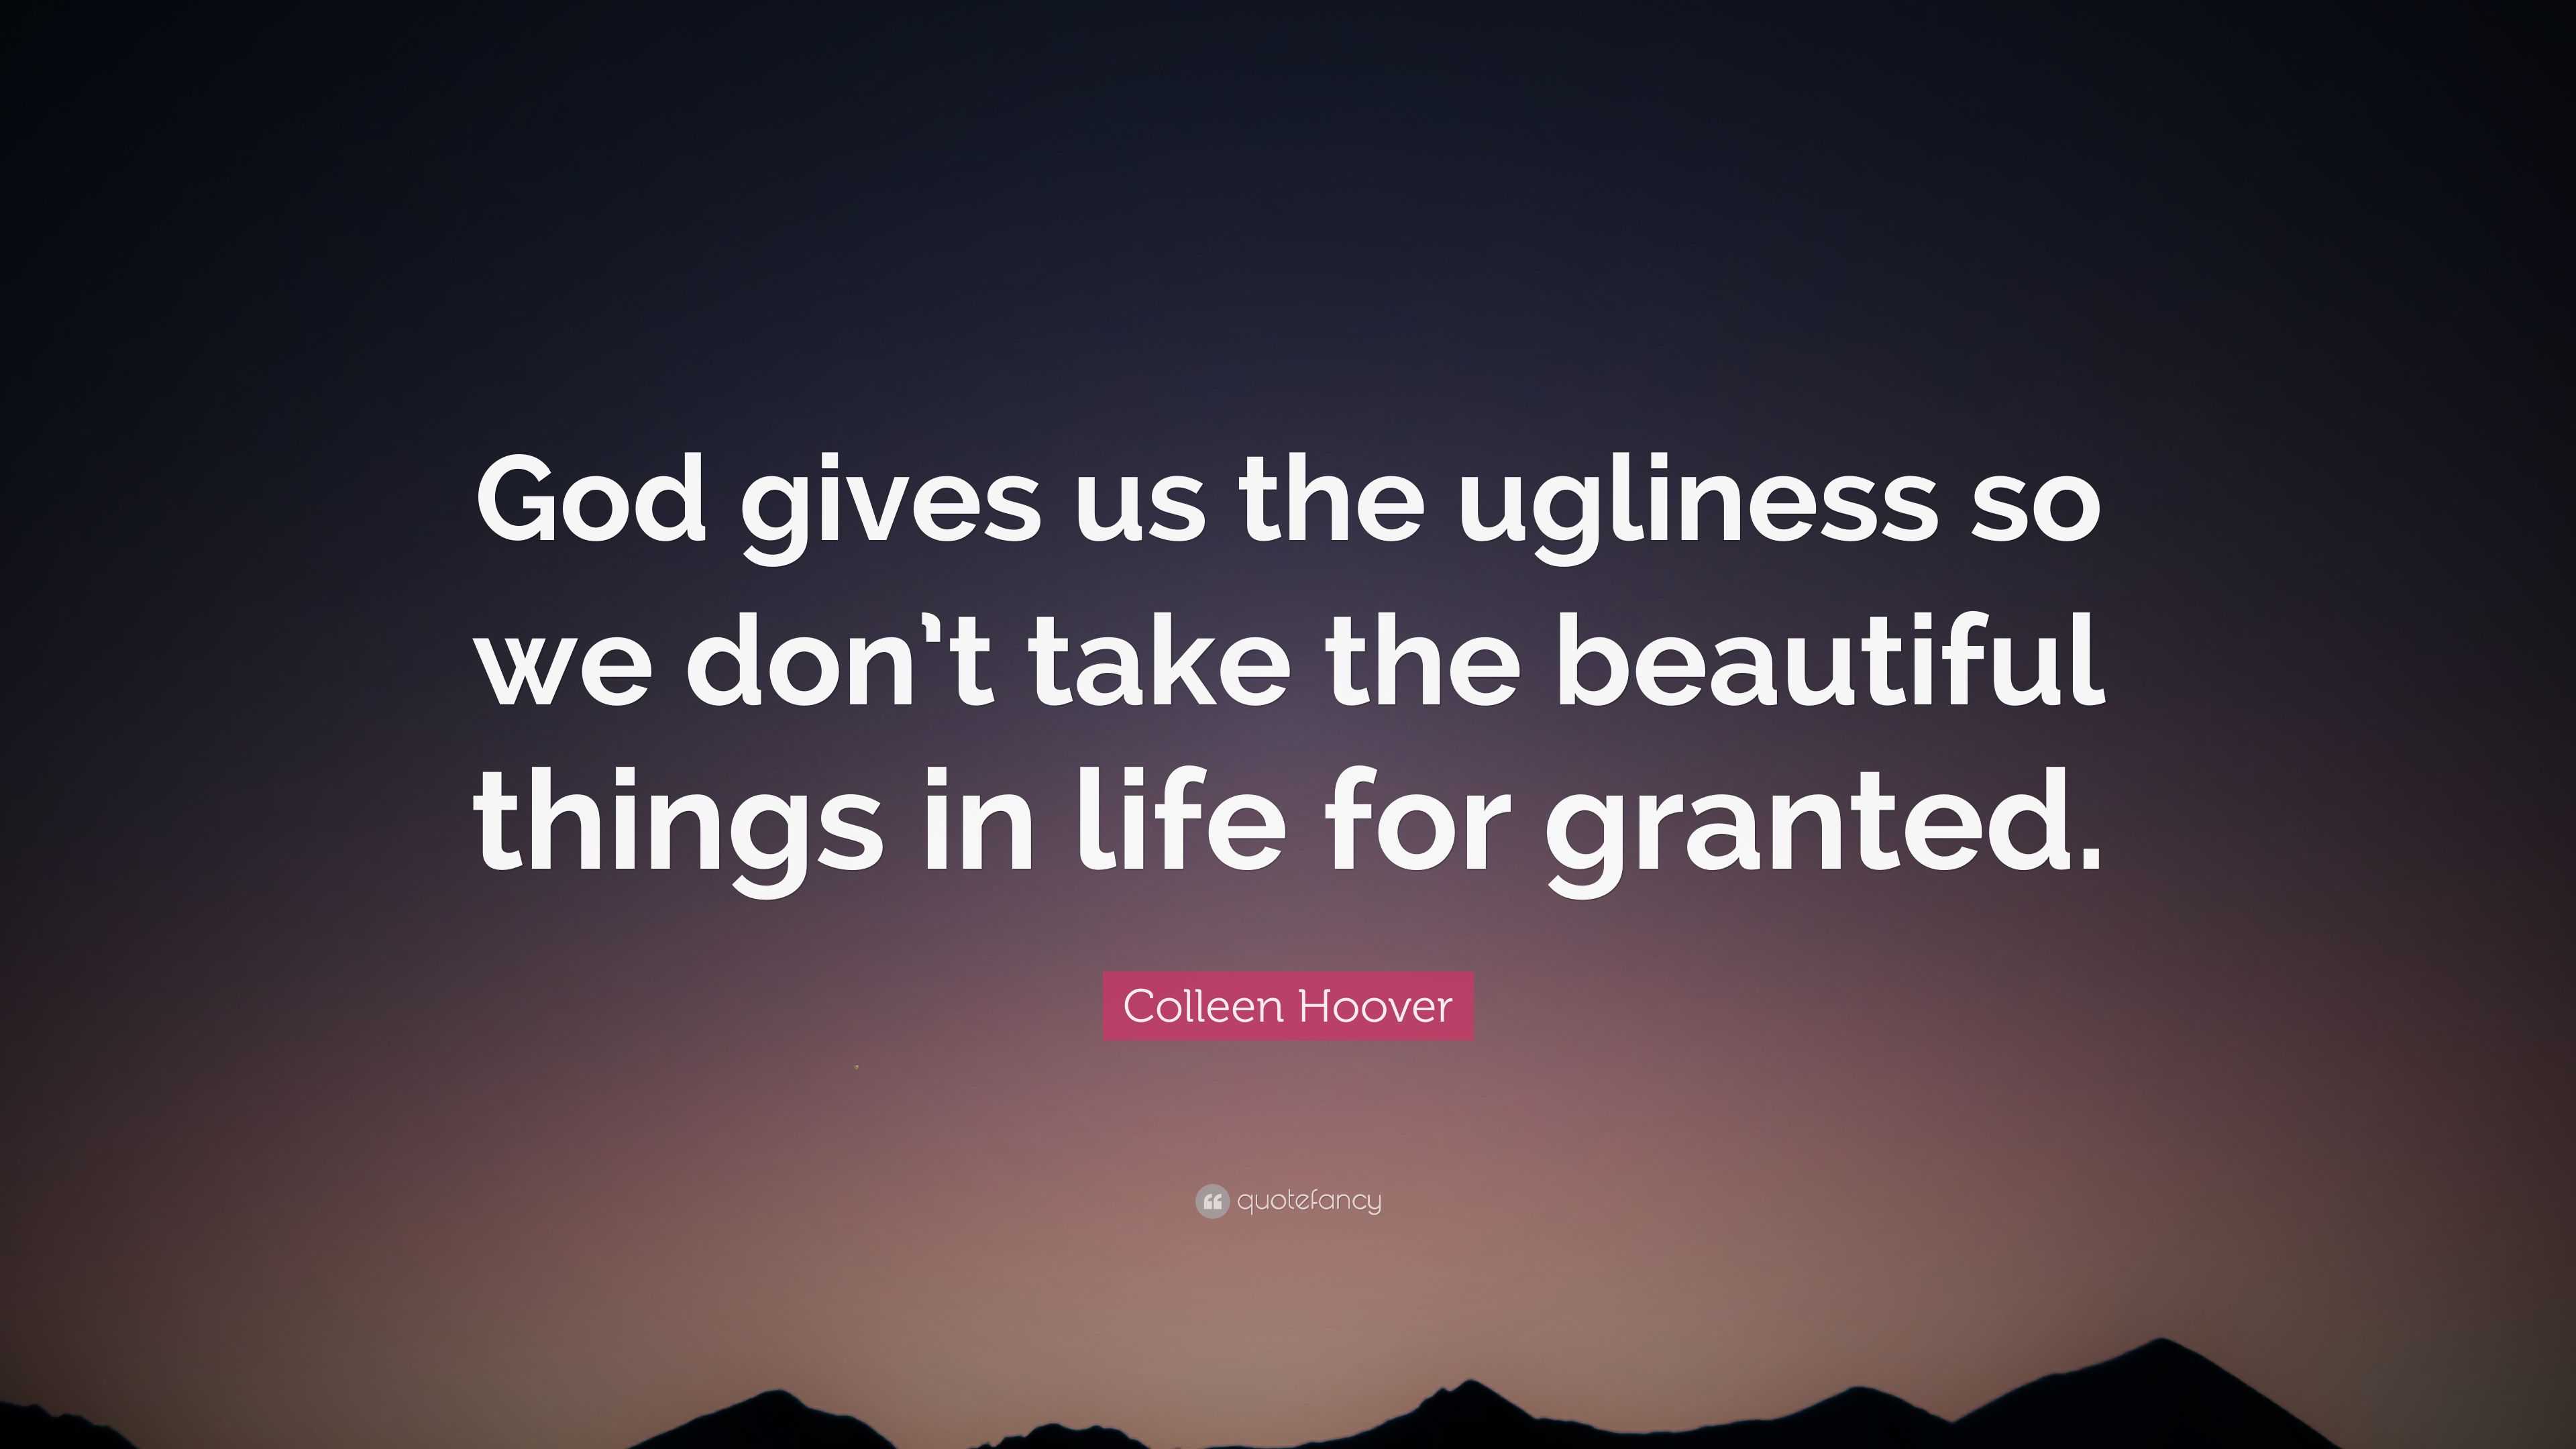 Colleen Hoover Quote “God gives us the ugliness so we don t take